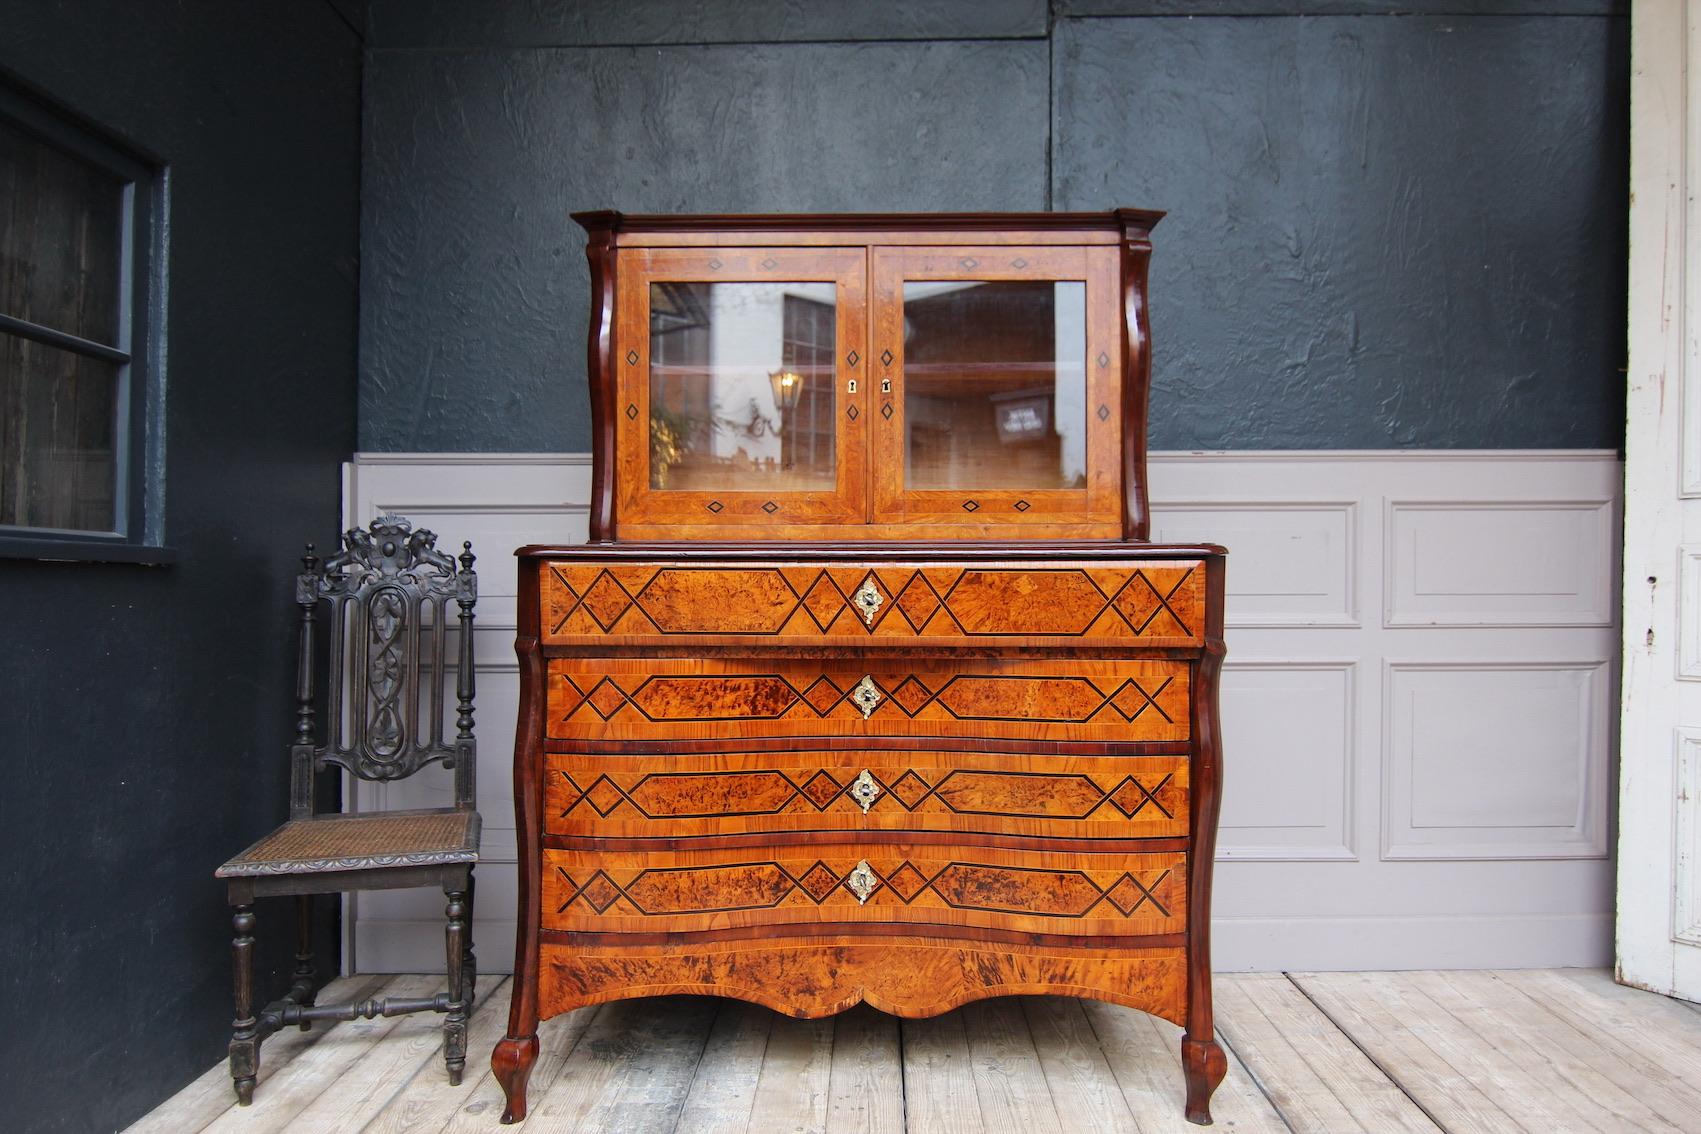 Important richly inlaid chest of drawers with a display cabinet. Probably from the 2nd half of the 18th century. Attributed to the region around the border triangle of Germany, Belgium and the Netherlands. In particular inspired by the Liège style